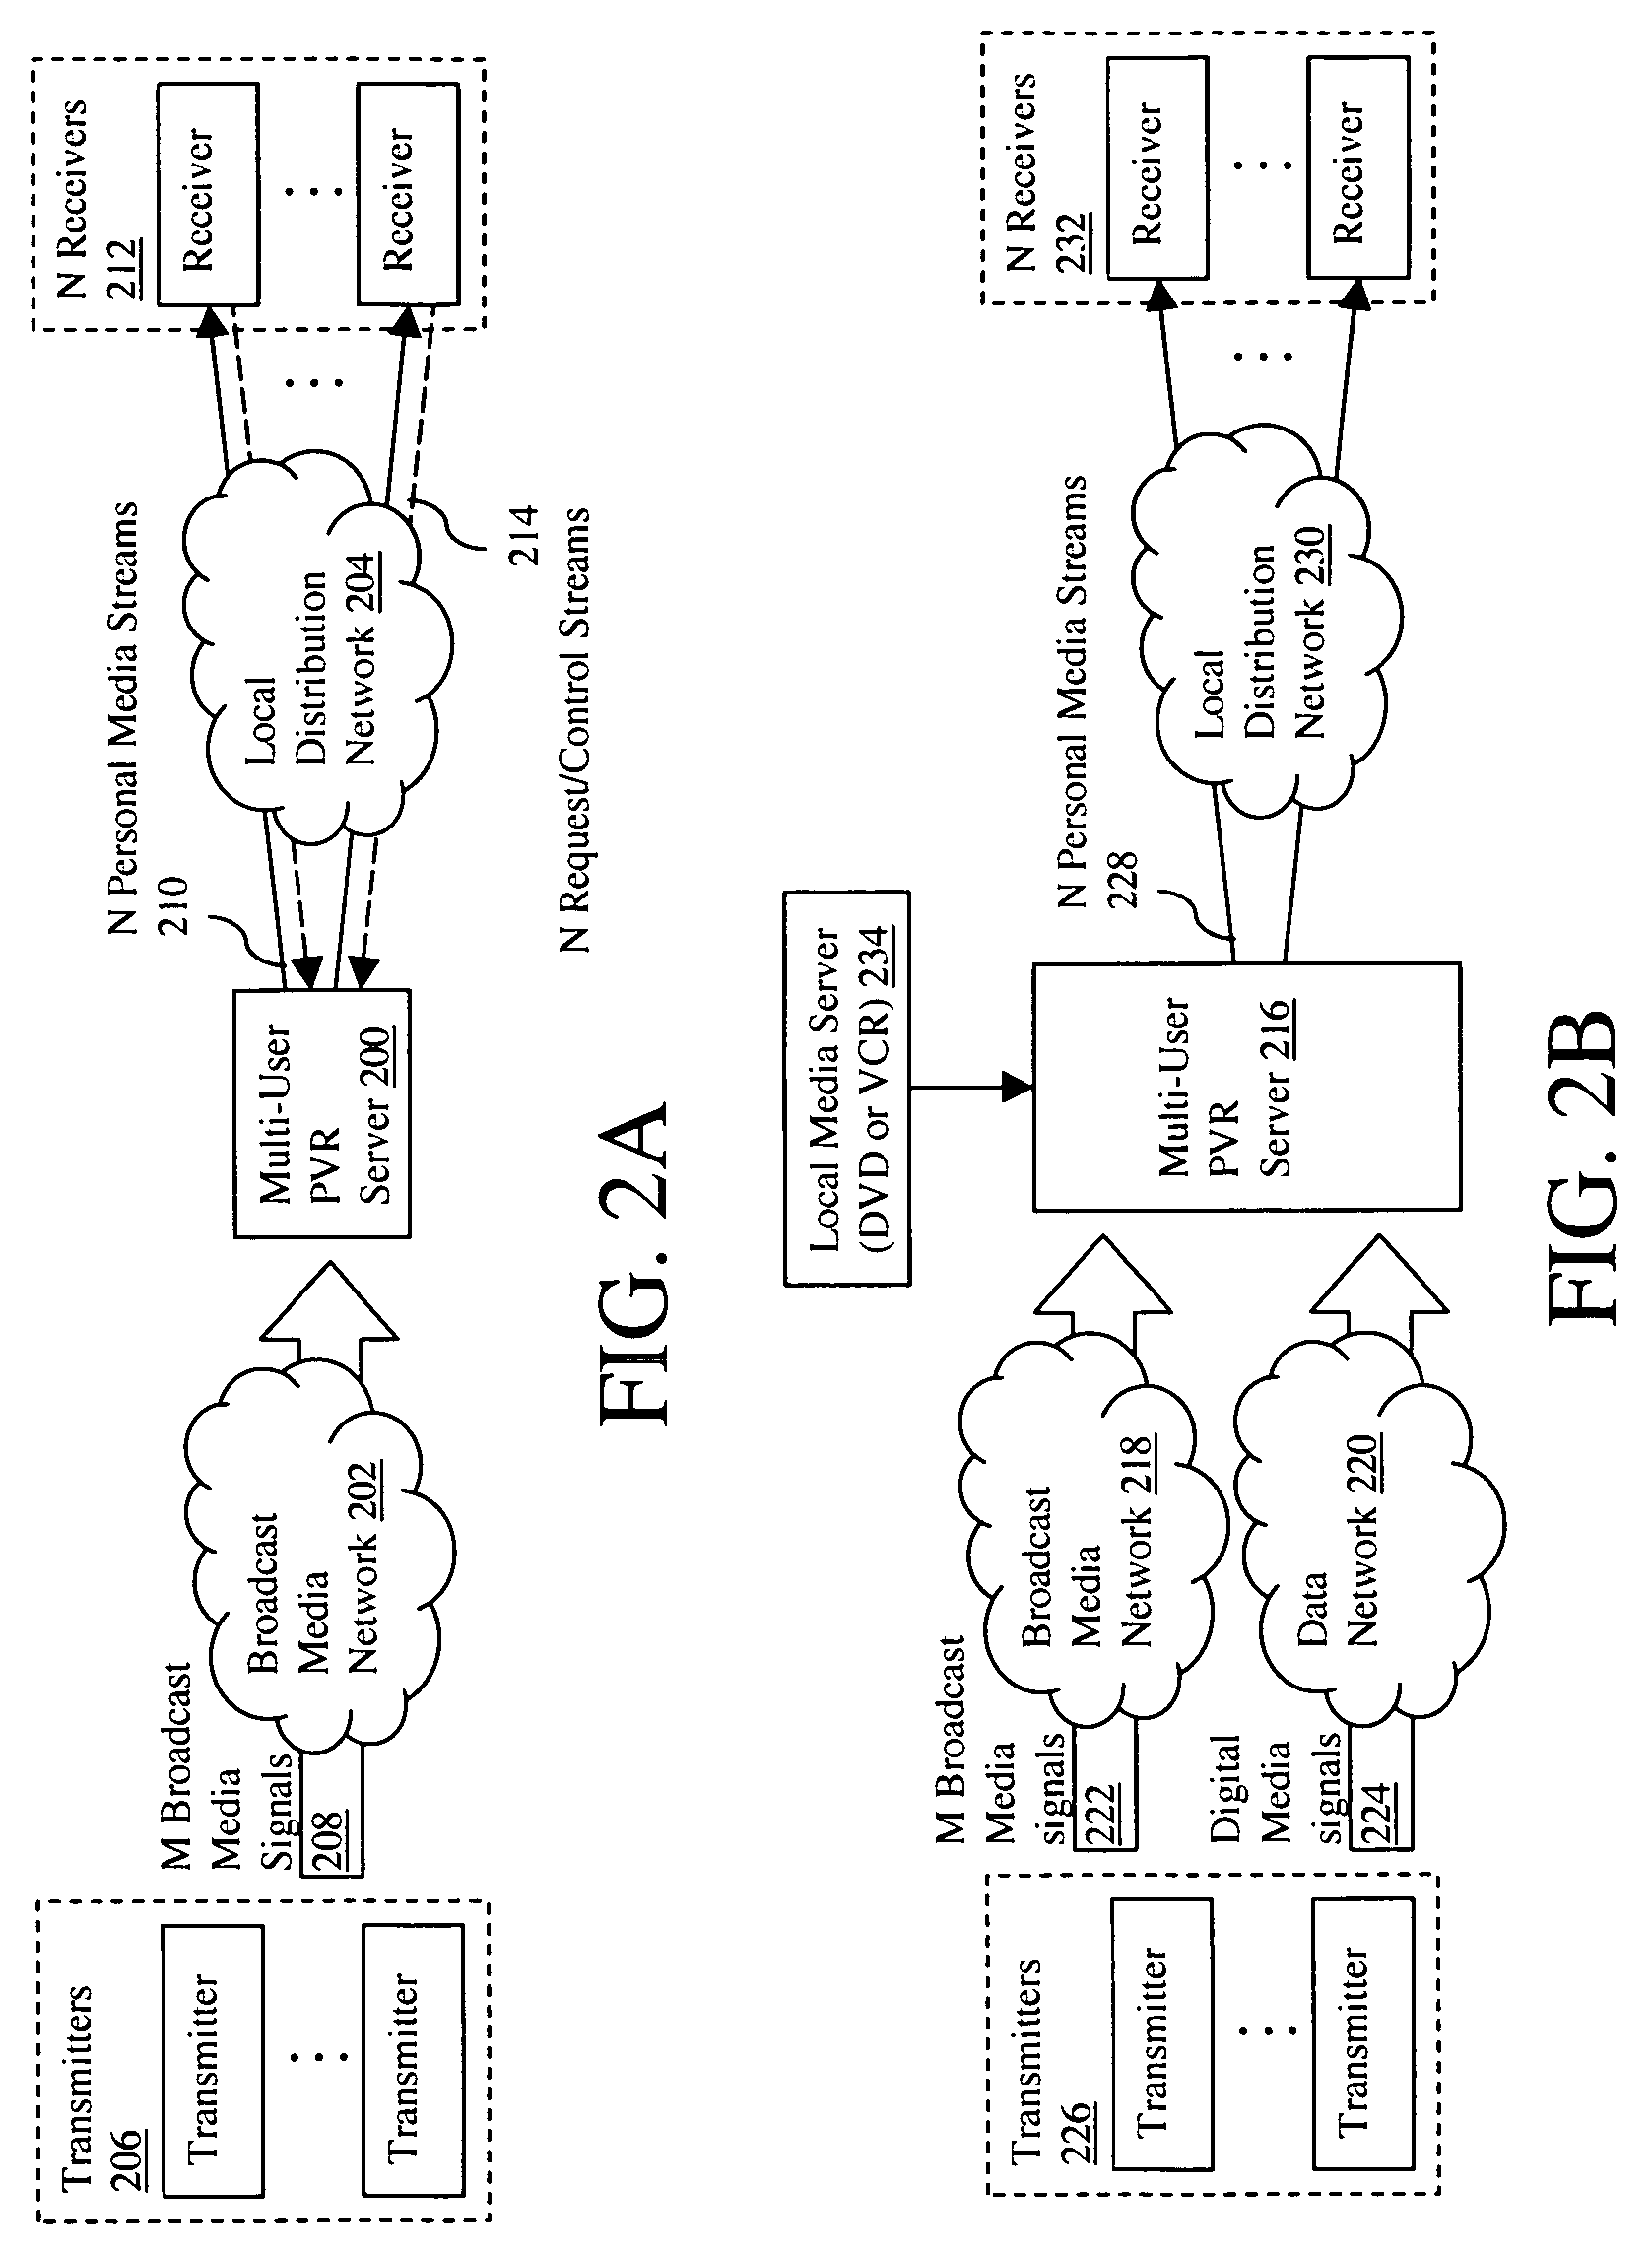 Multi-user personalized digital multimedia distribution methods and systems